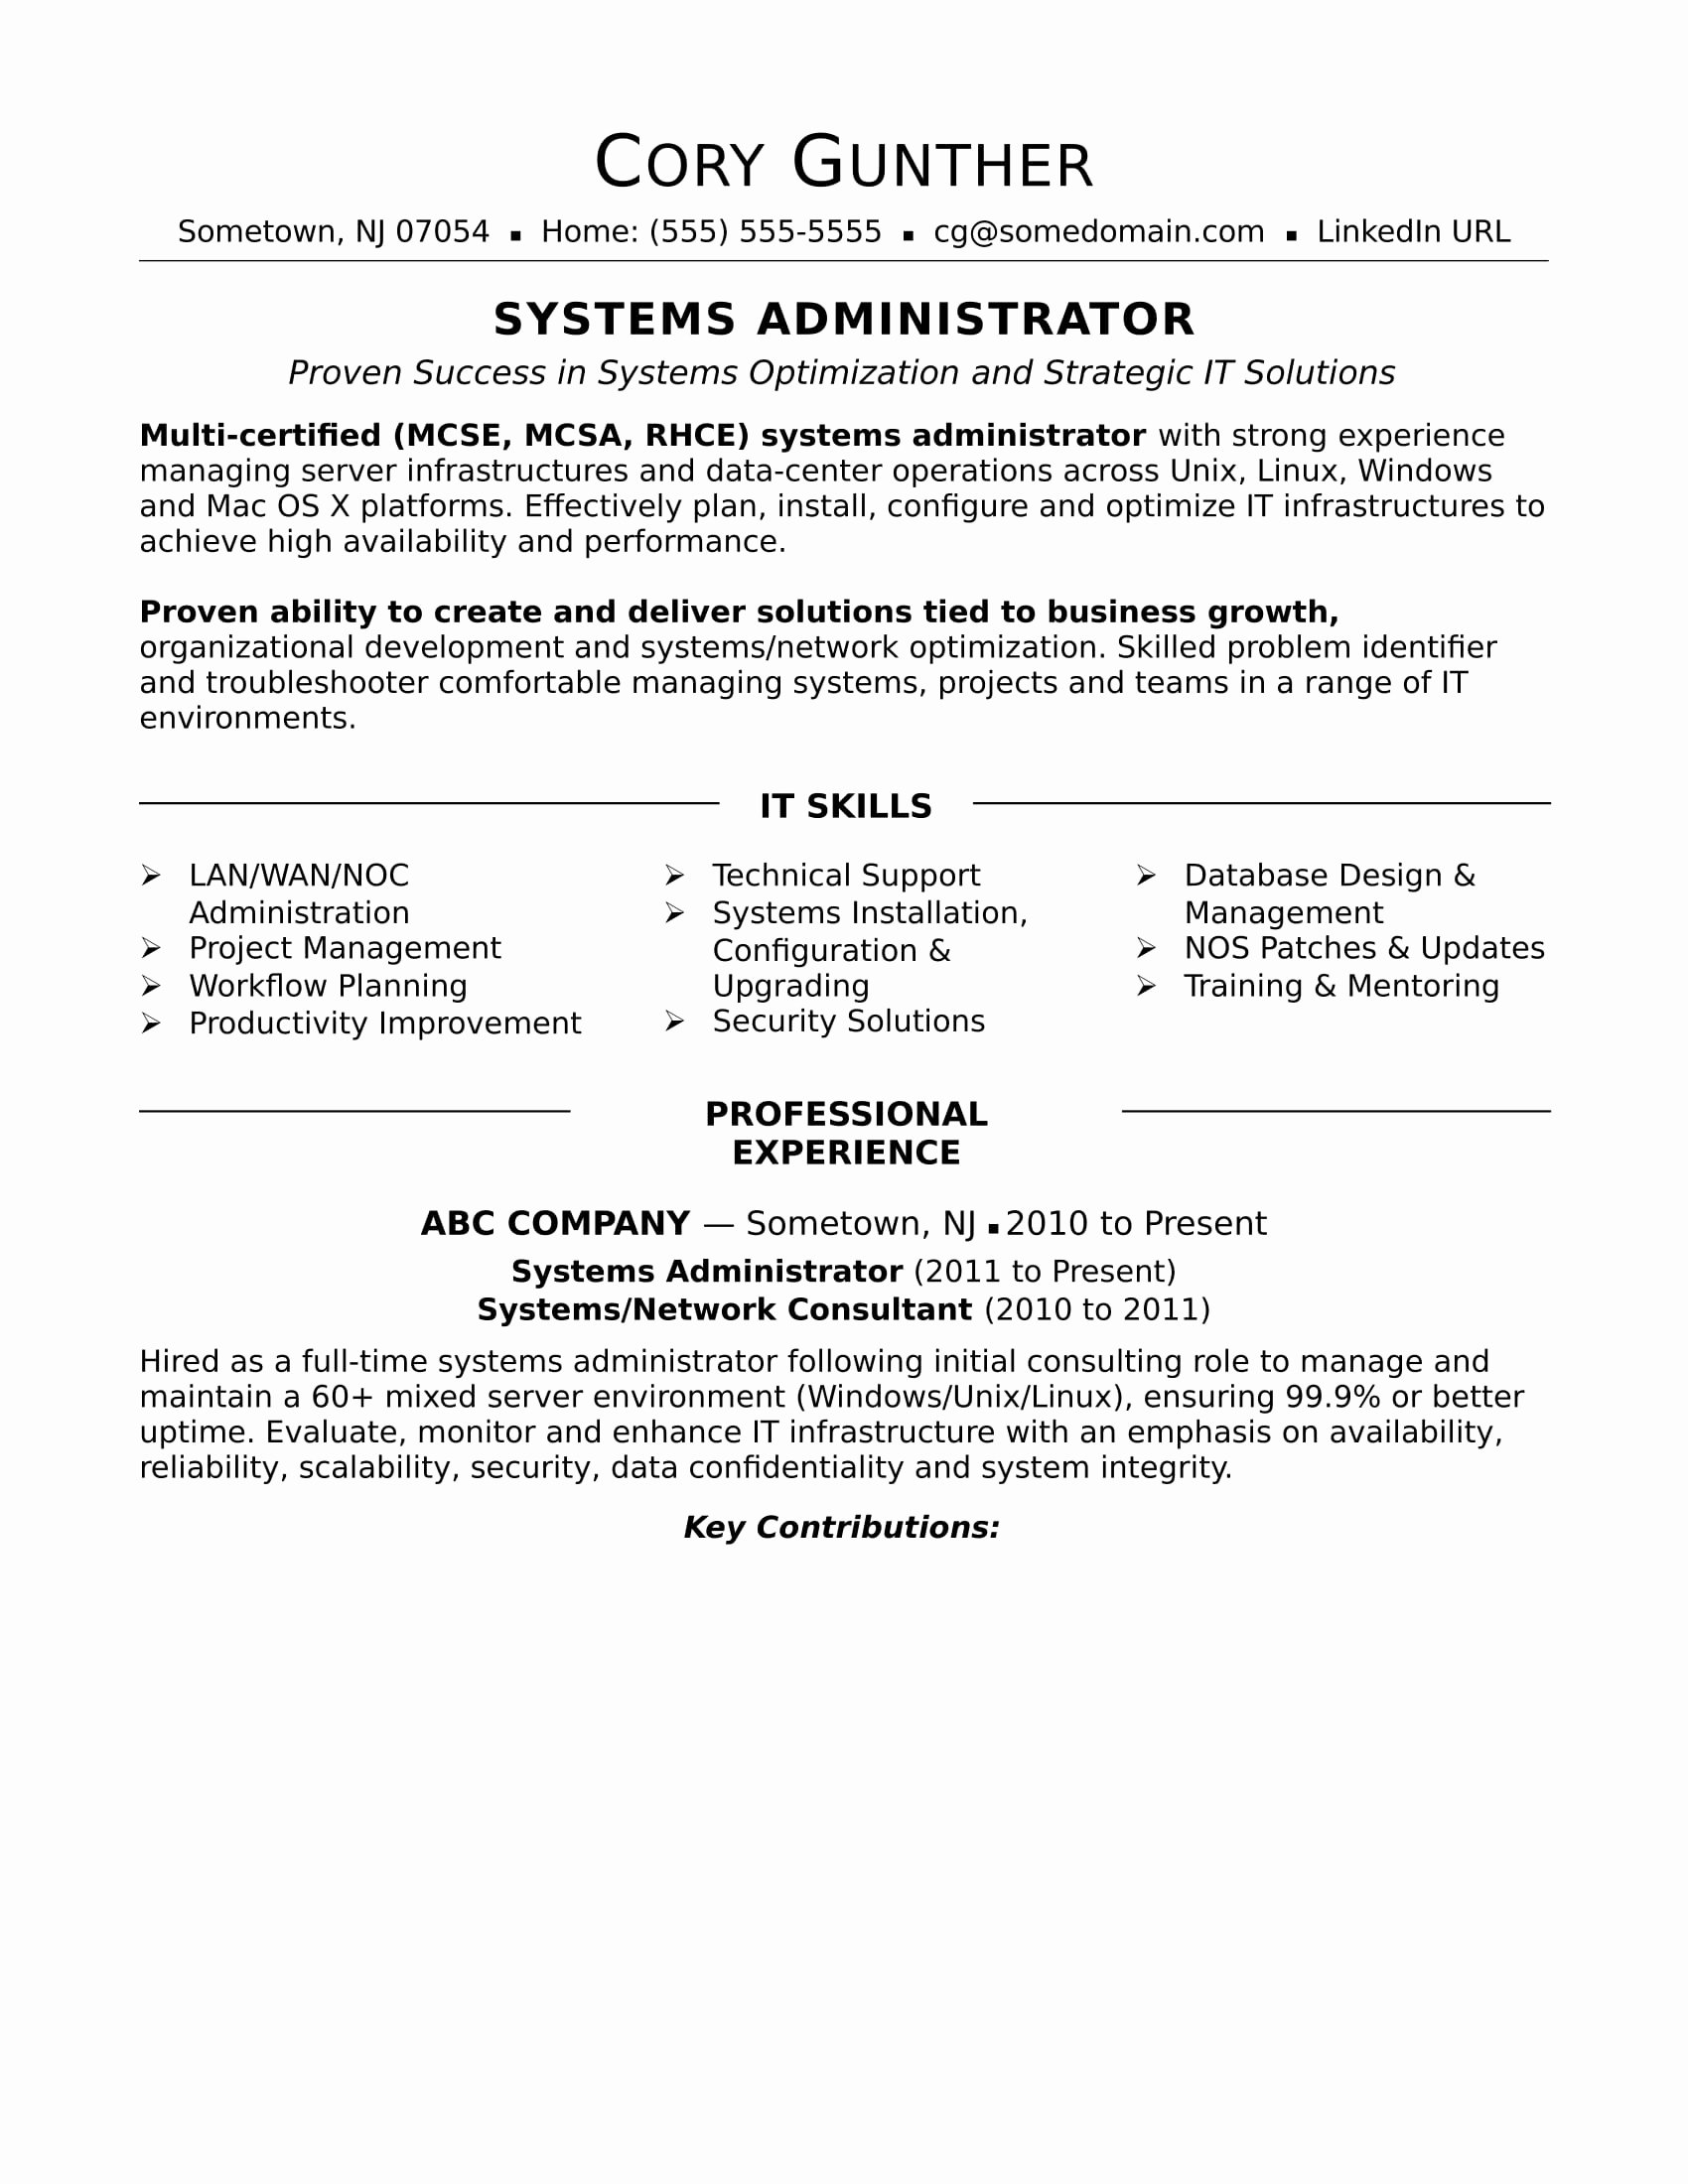 Sample Resume for An Experienced Systems Administrator